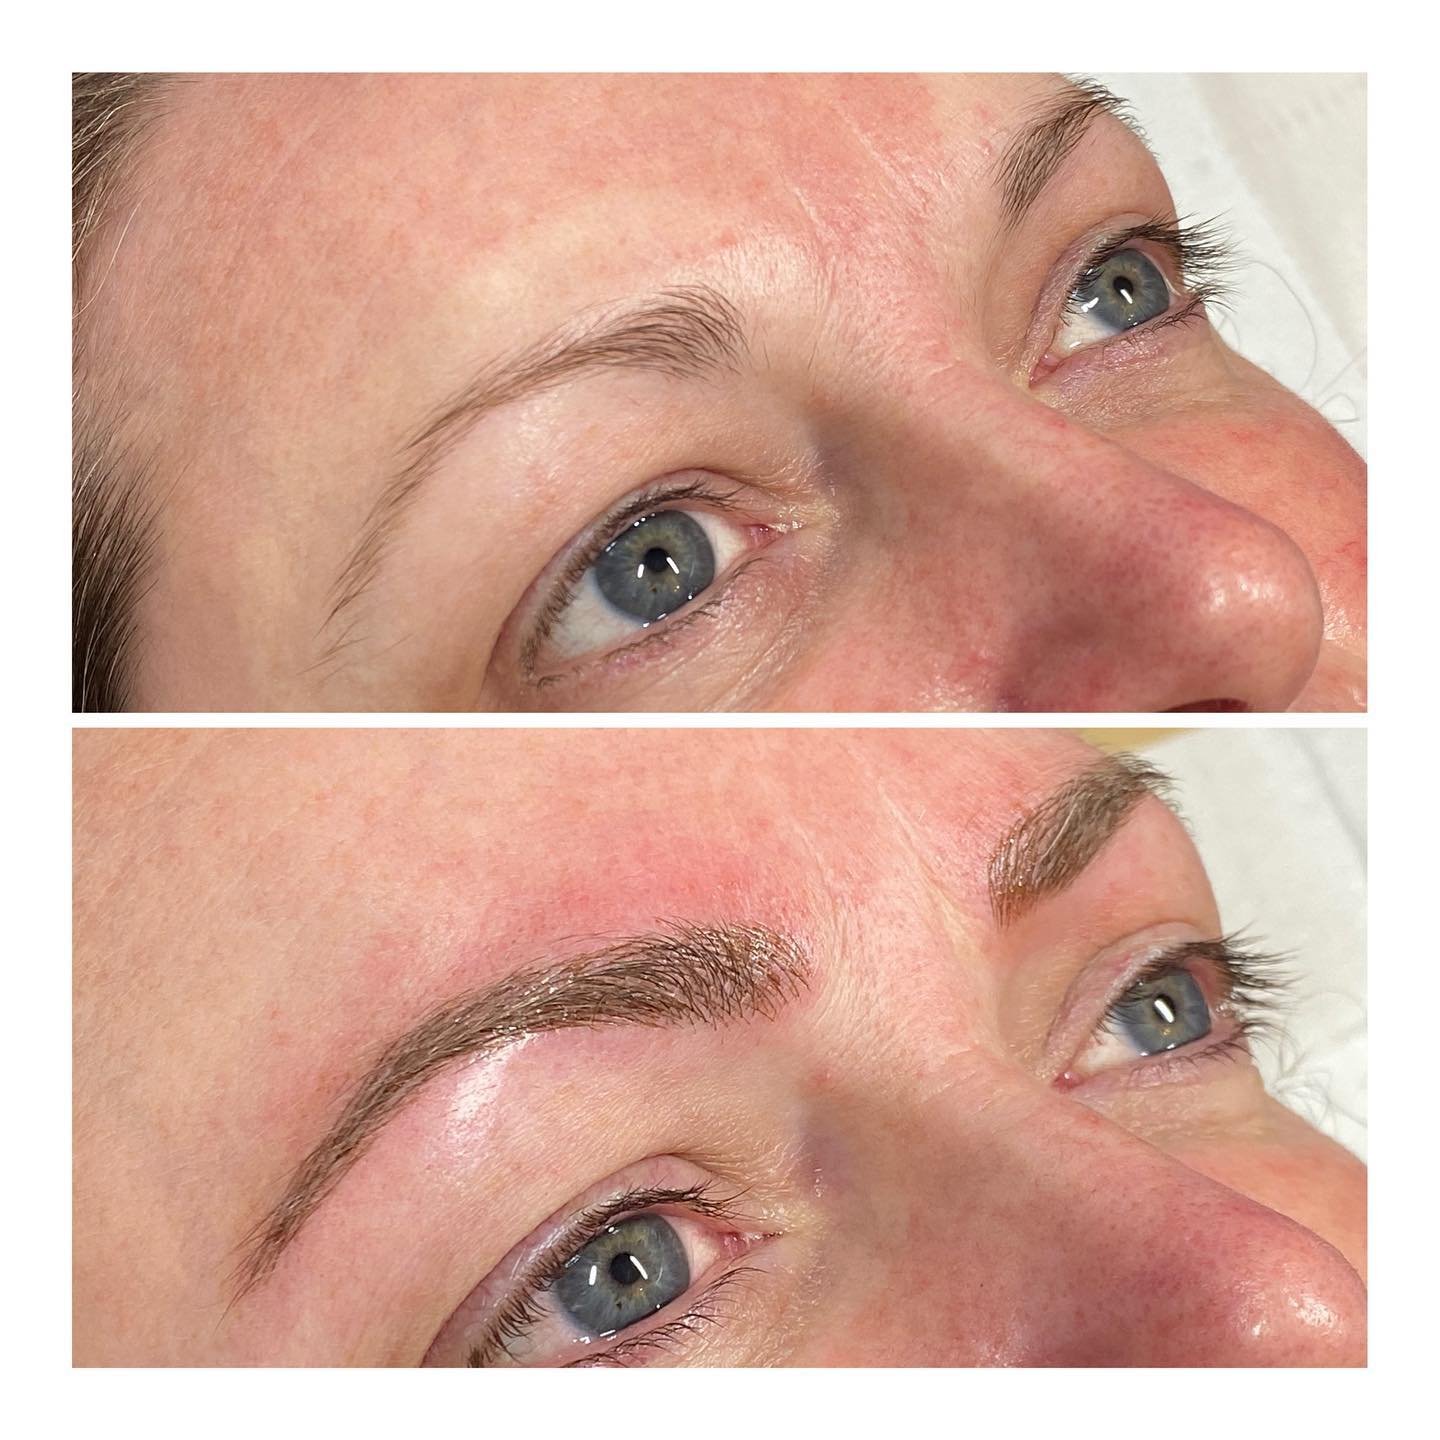 Photo taken straight after, redness will fade after an hour and seven days for the skin to heal over and colour fade. Call for more info t.789000 #microblading #microbladingeyebrows #semipermanentmakeup #naturallookingbrows #brows2022 #jerseyci #micr